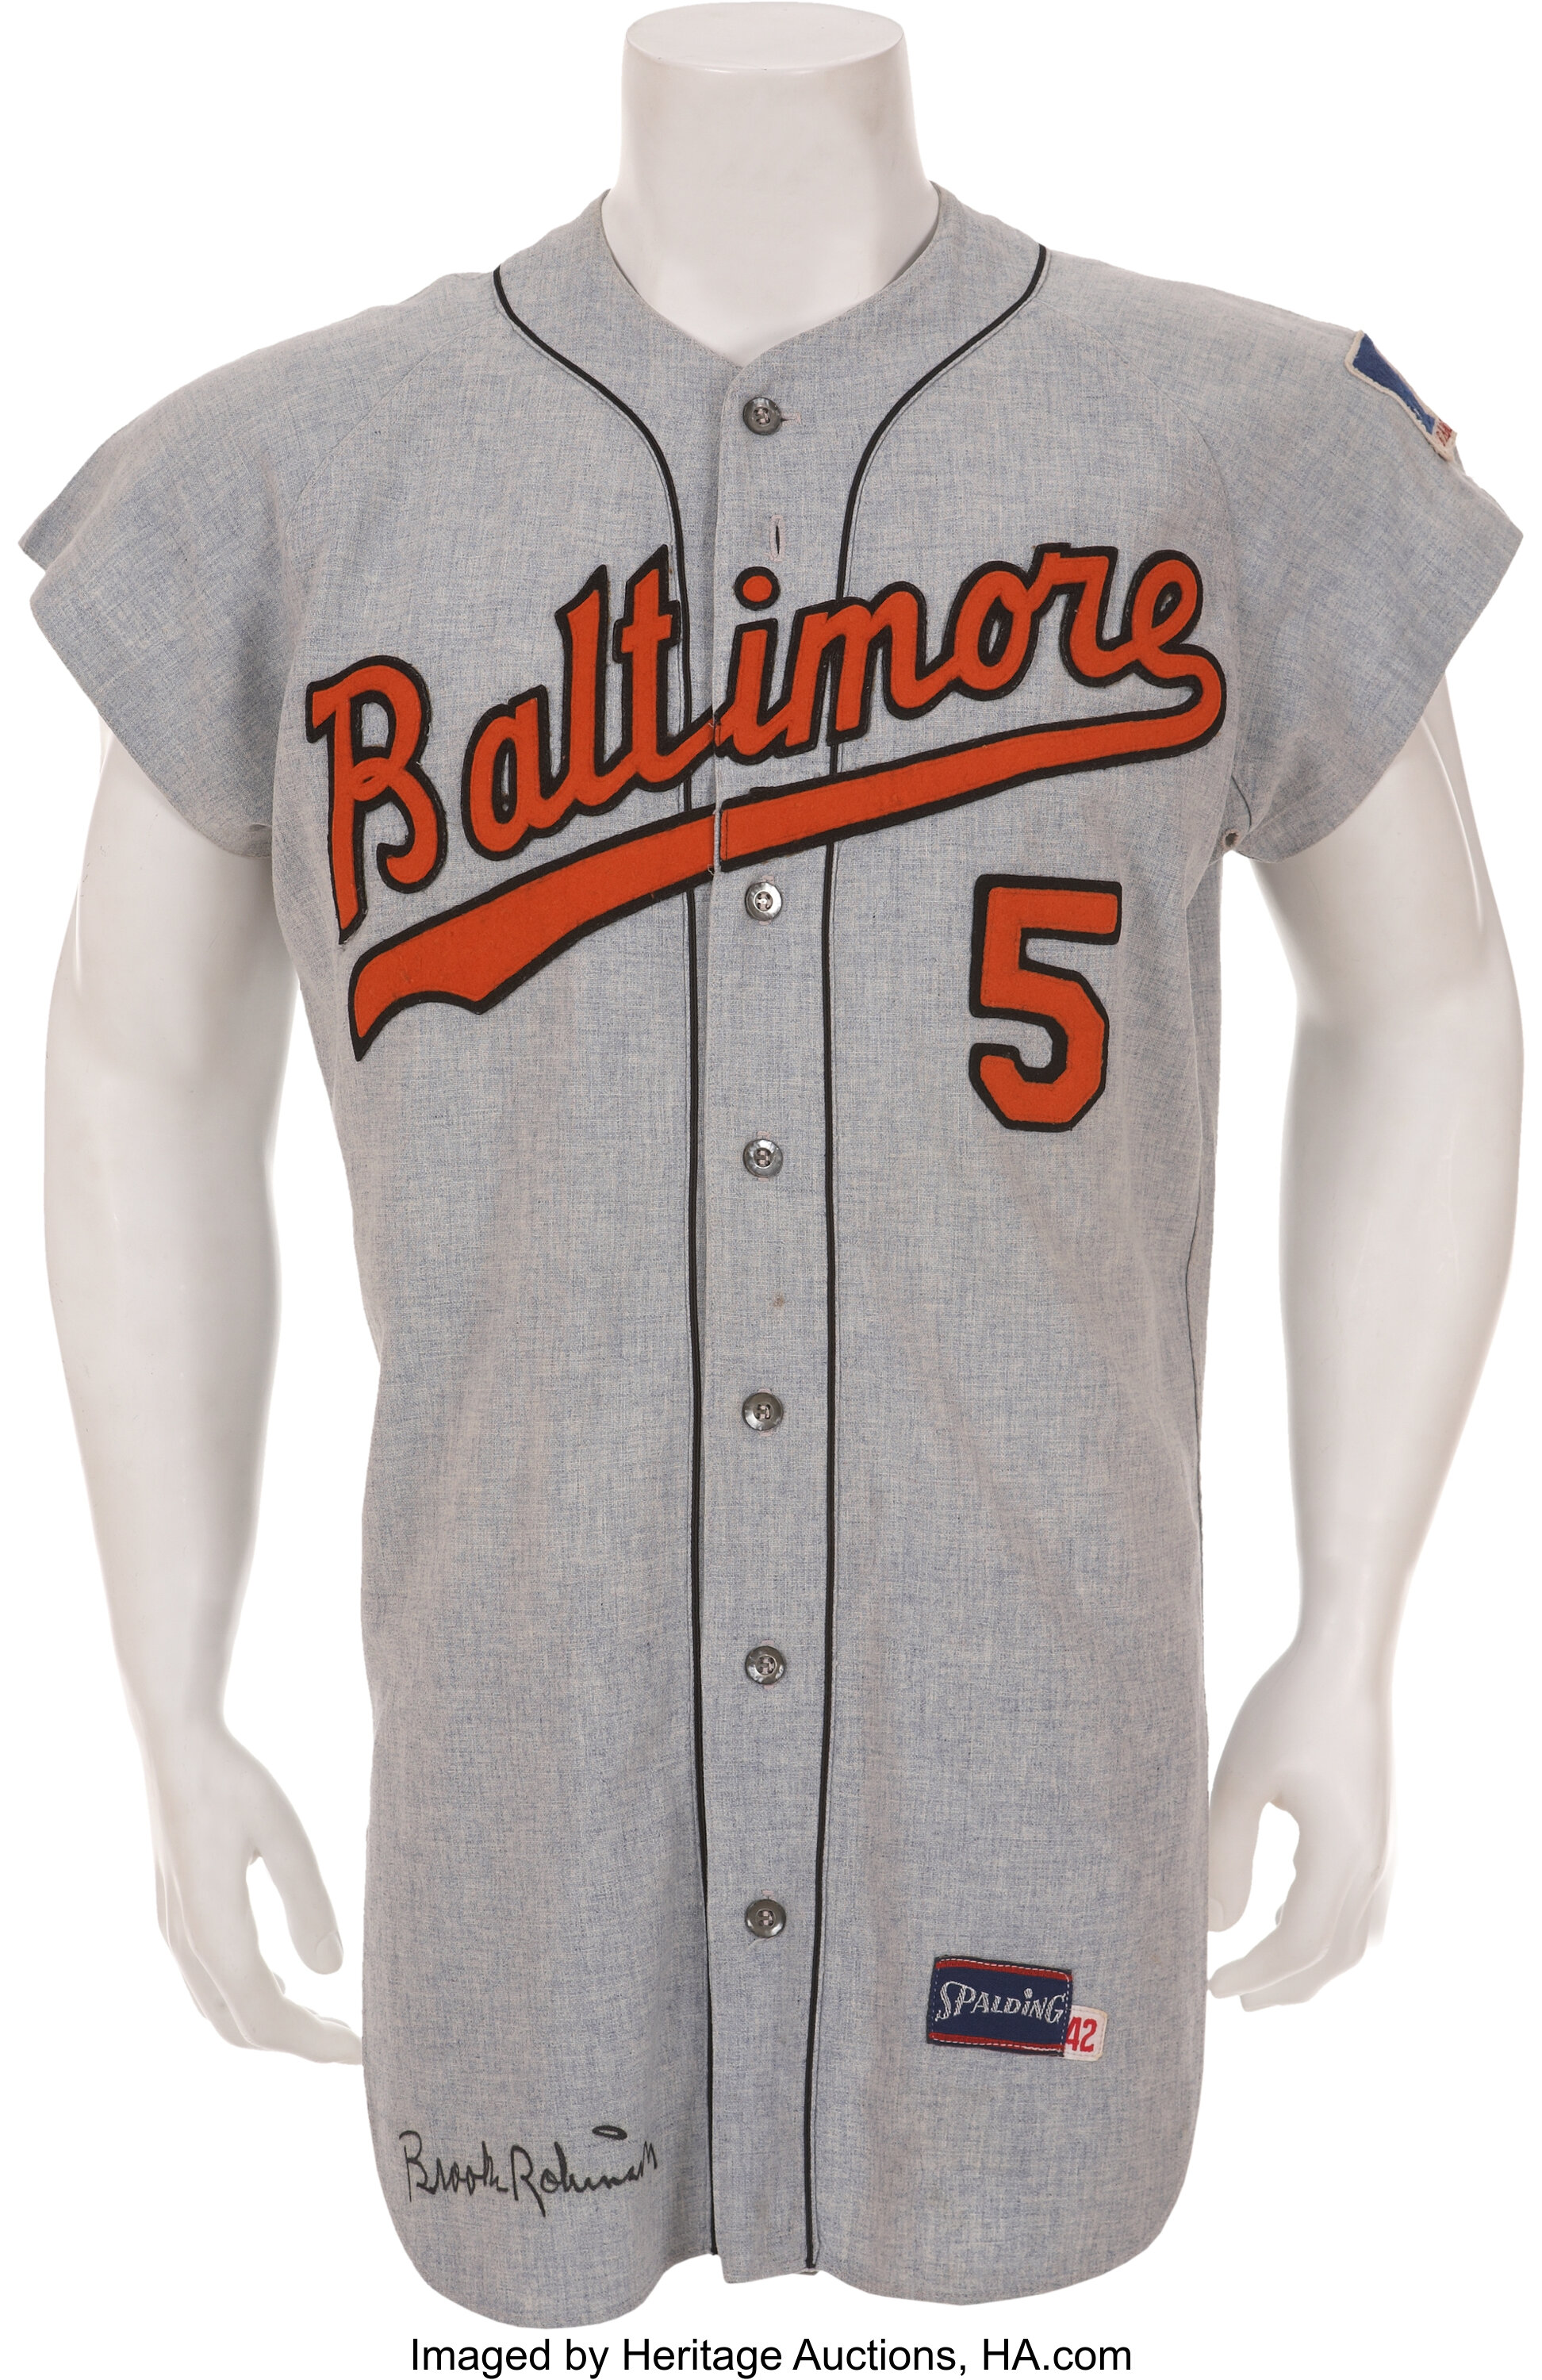 Baltimore Orioles jersey worn by Kevin Guasman